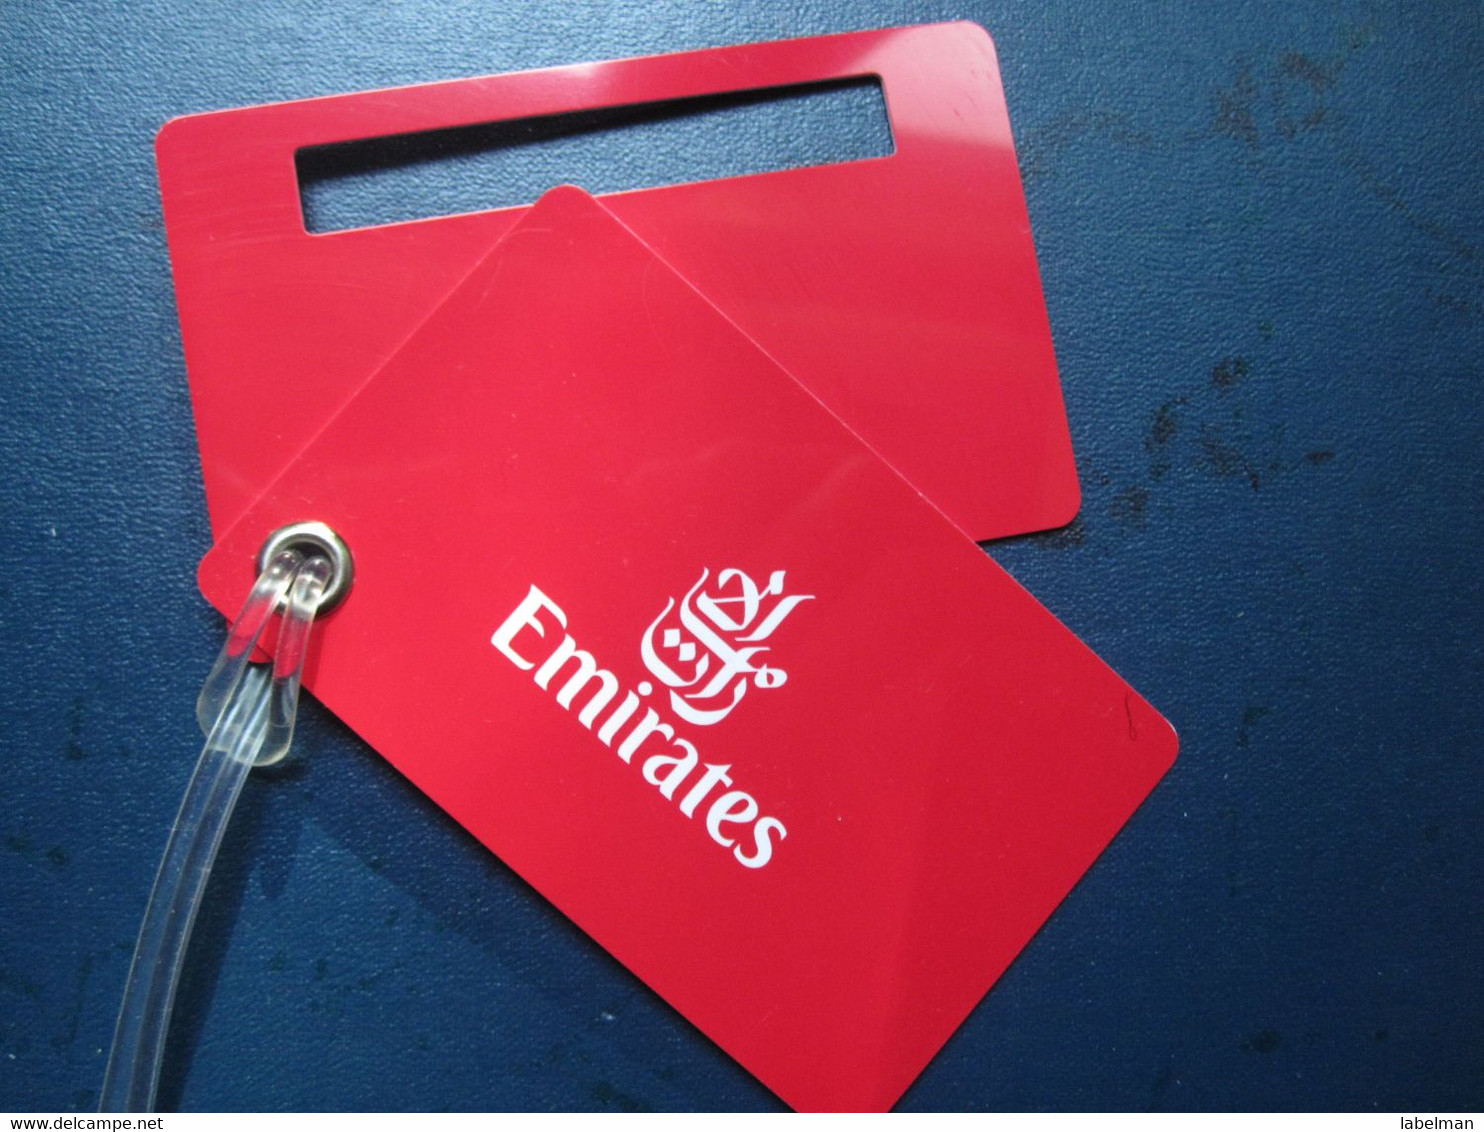 EMIRATES UAE UNITED ARABS CARD WELCOME TICKET AIRWAYS AIRLINE STICKER LABEL TAG LUGGAGE BUGGAGE PLANE AIRCRAFT AIRPORT - Mundo